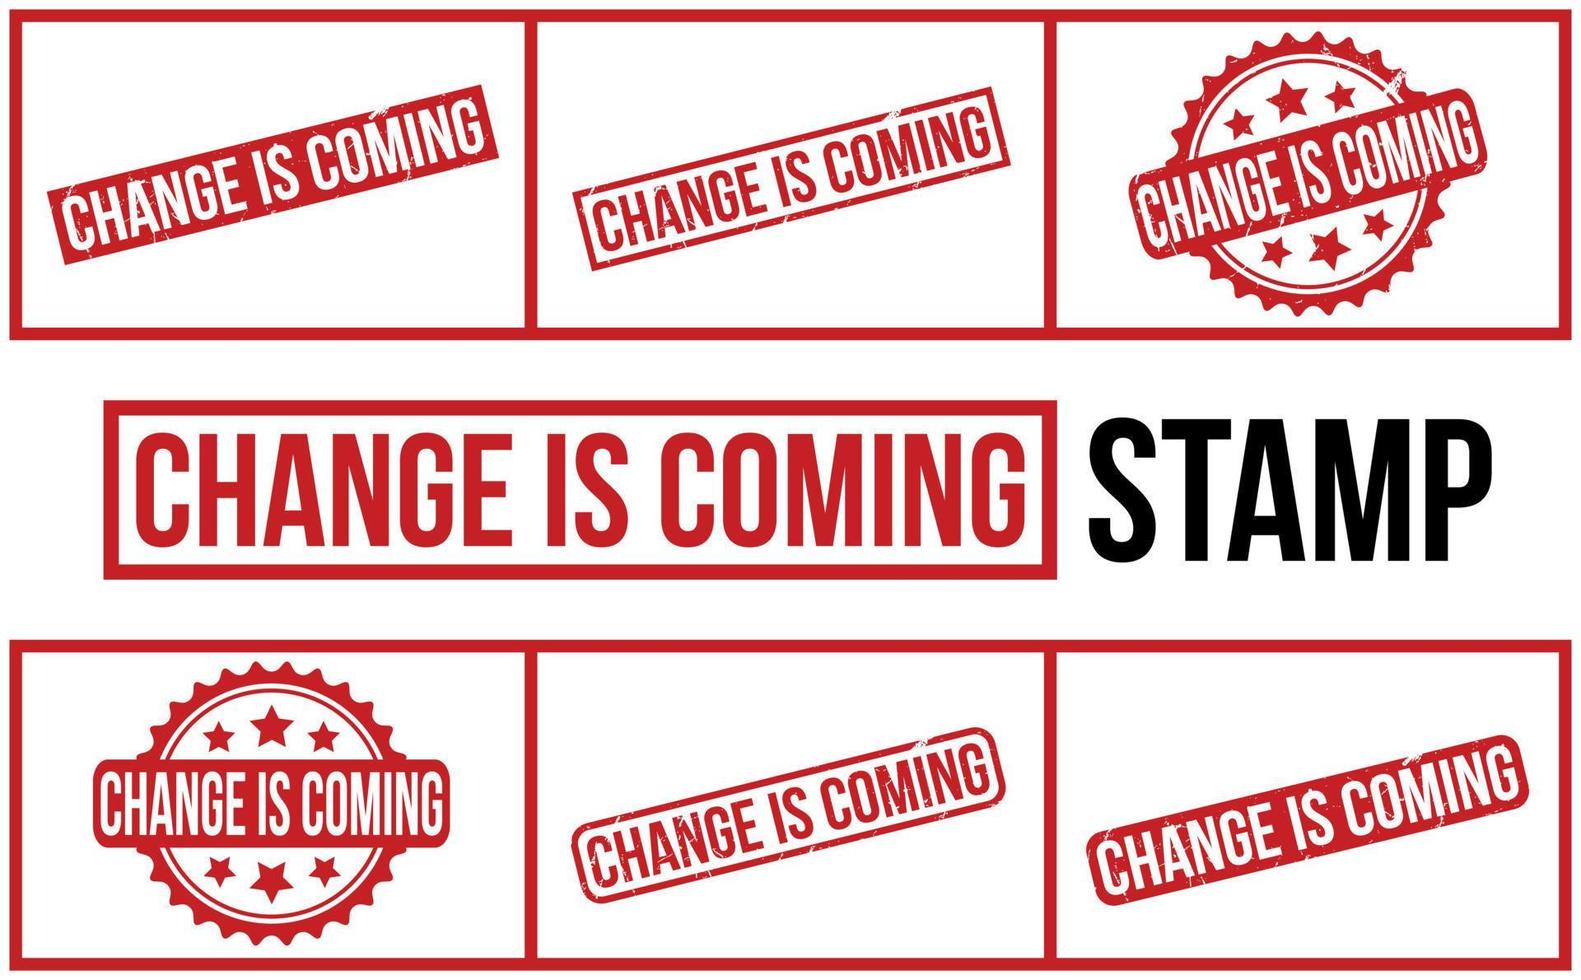 Change Is Coming rubber grunge stamp set vector